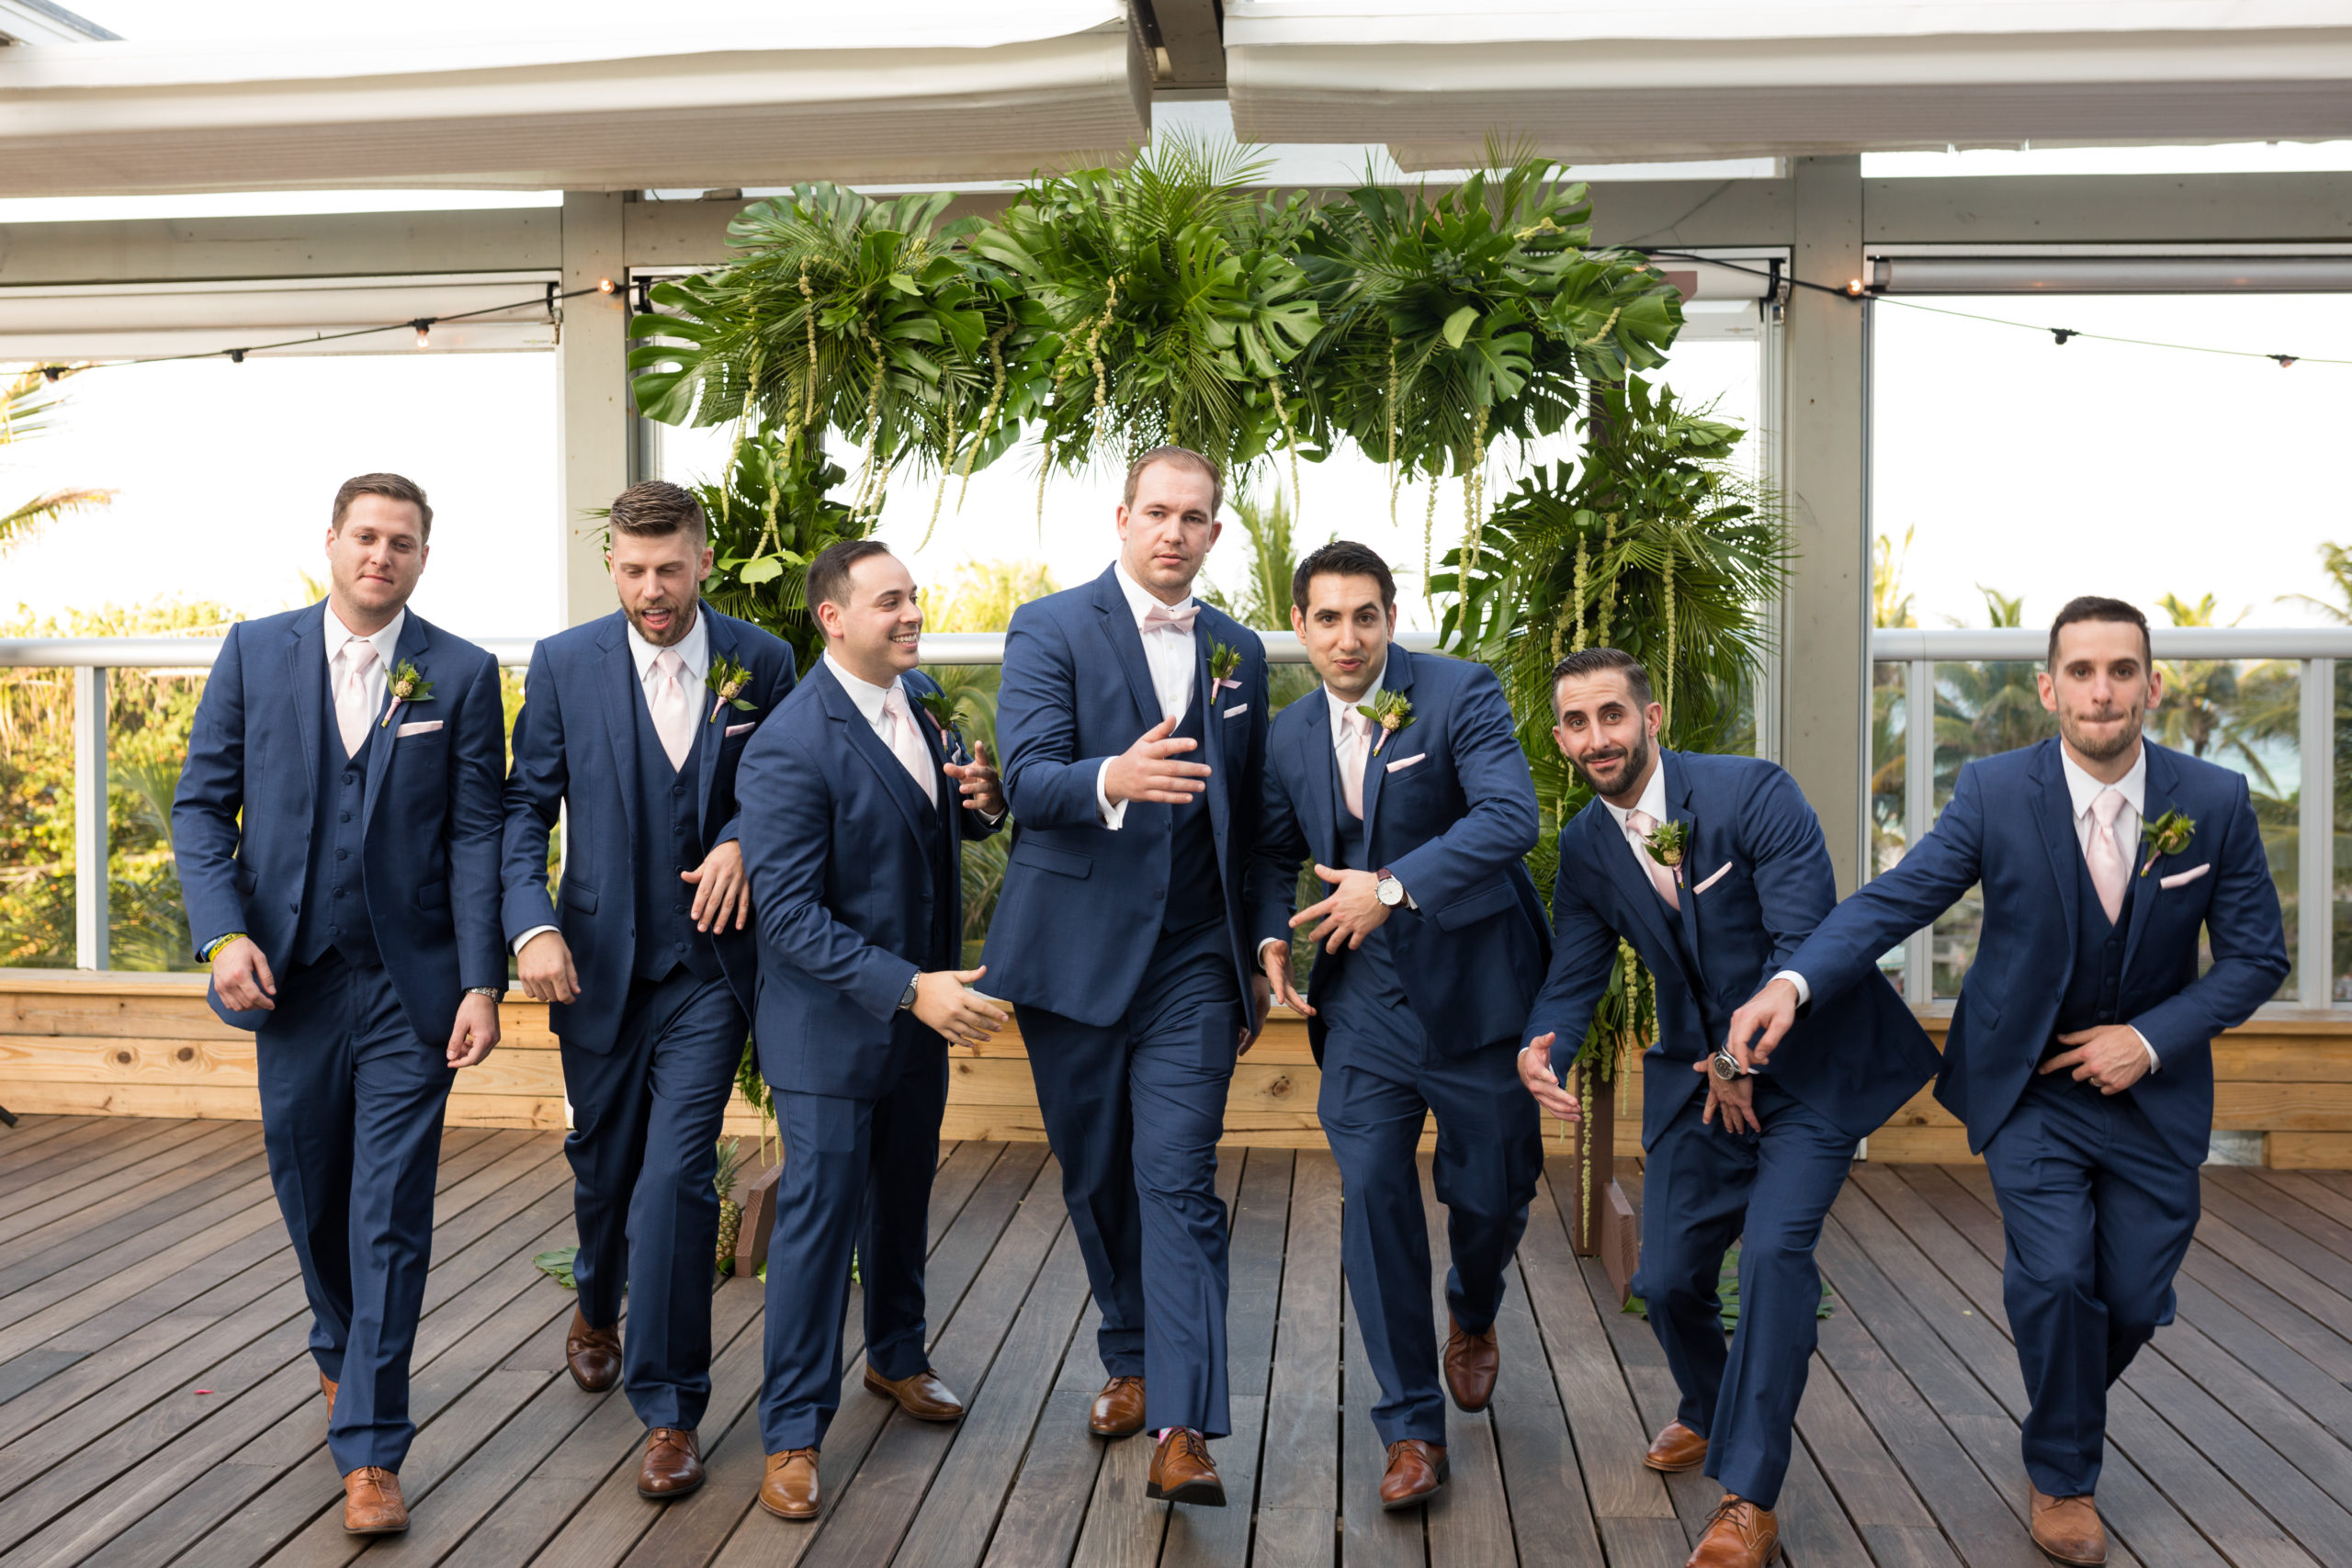 The groom and his groomsmen taking a funny picture after ceremony in their blue suits at the confidante miami beach